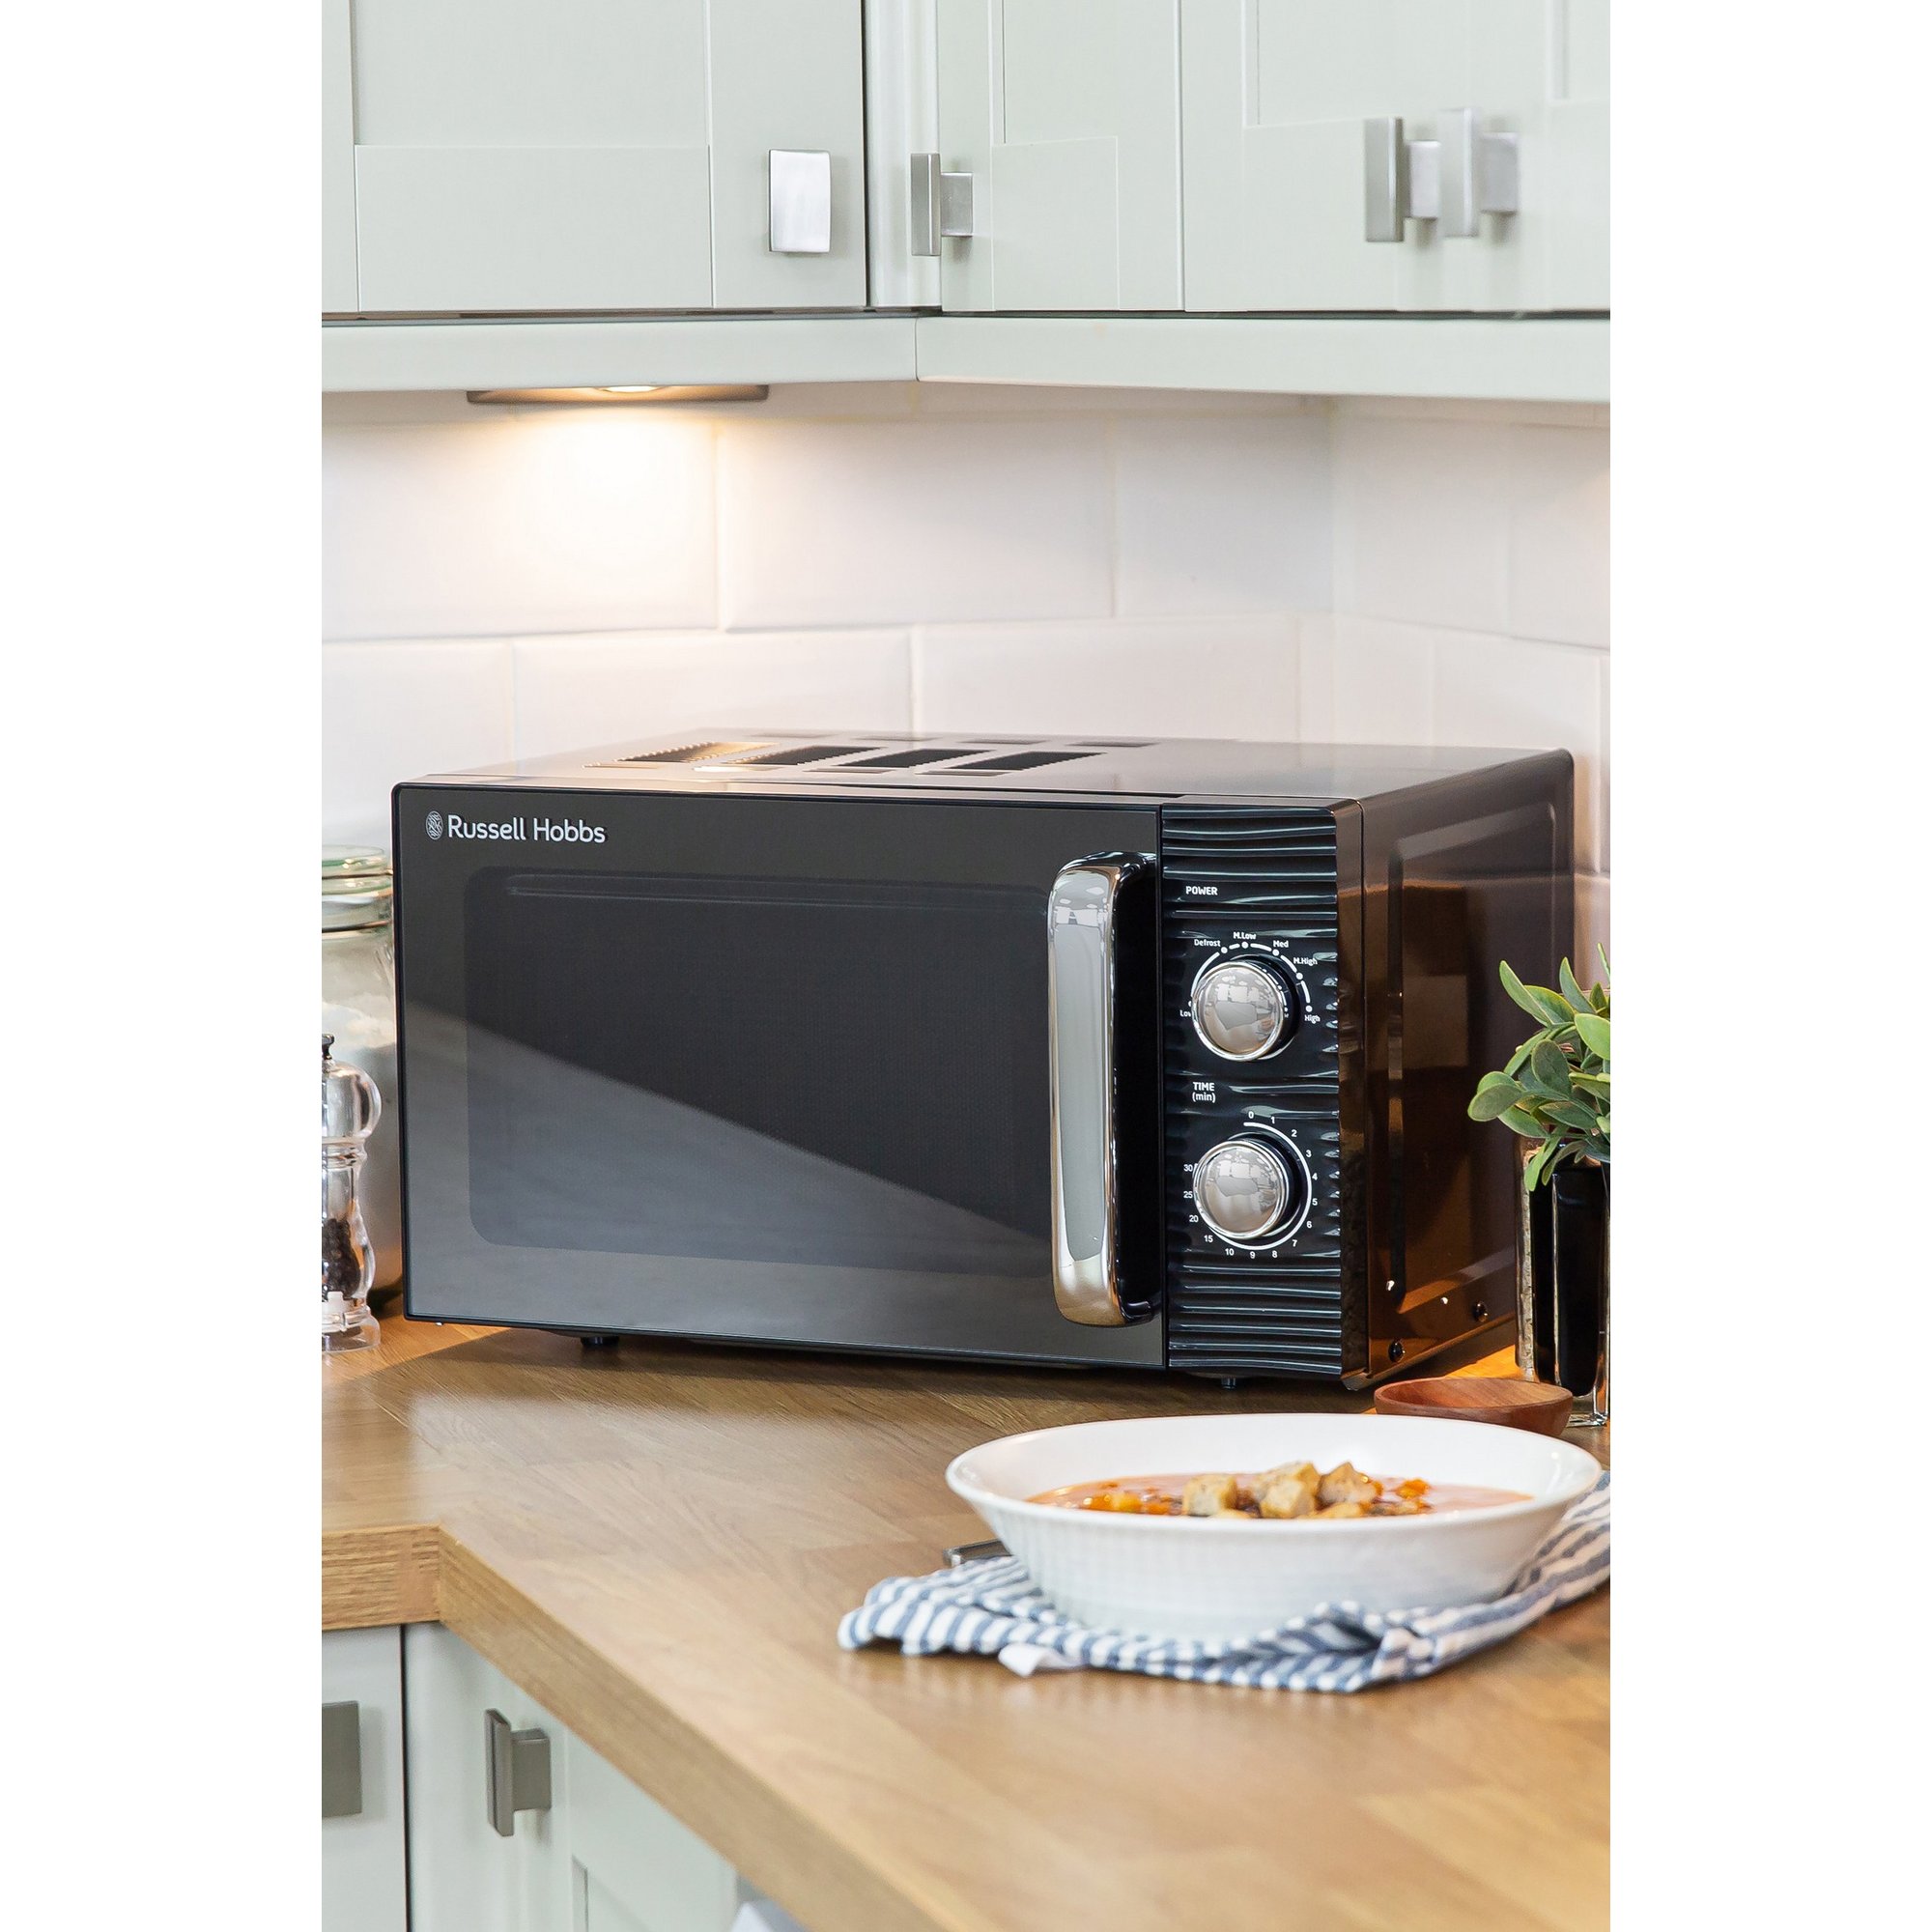 Russell Hobbs Inspire 17 Litre Manual Microwave